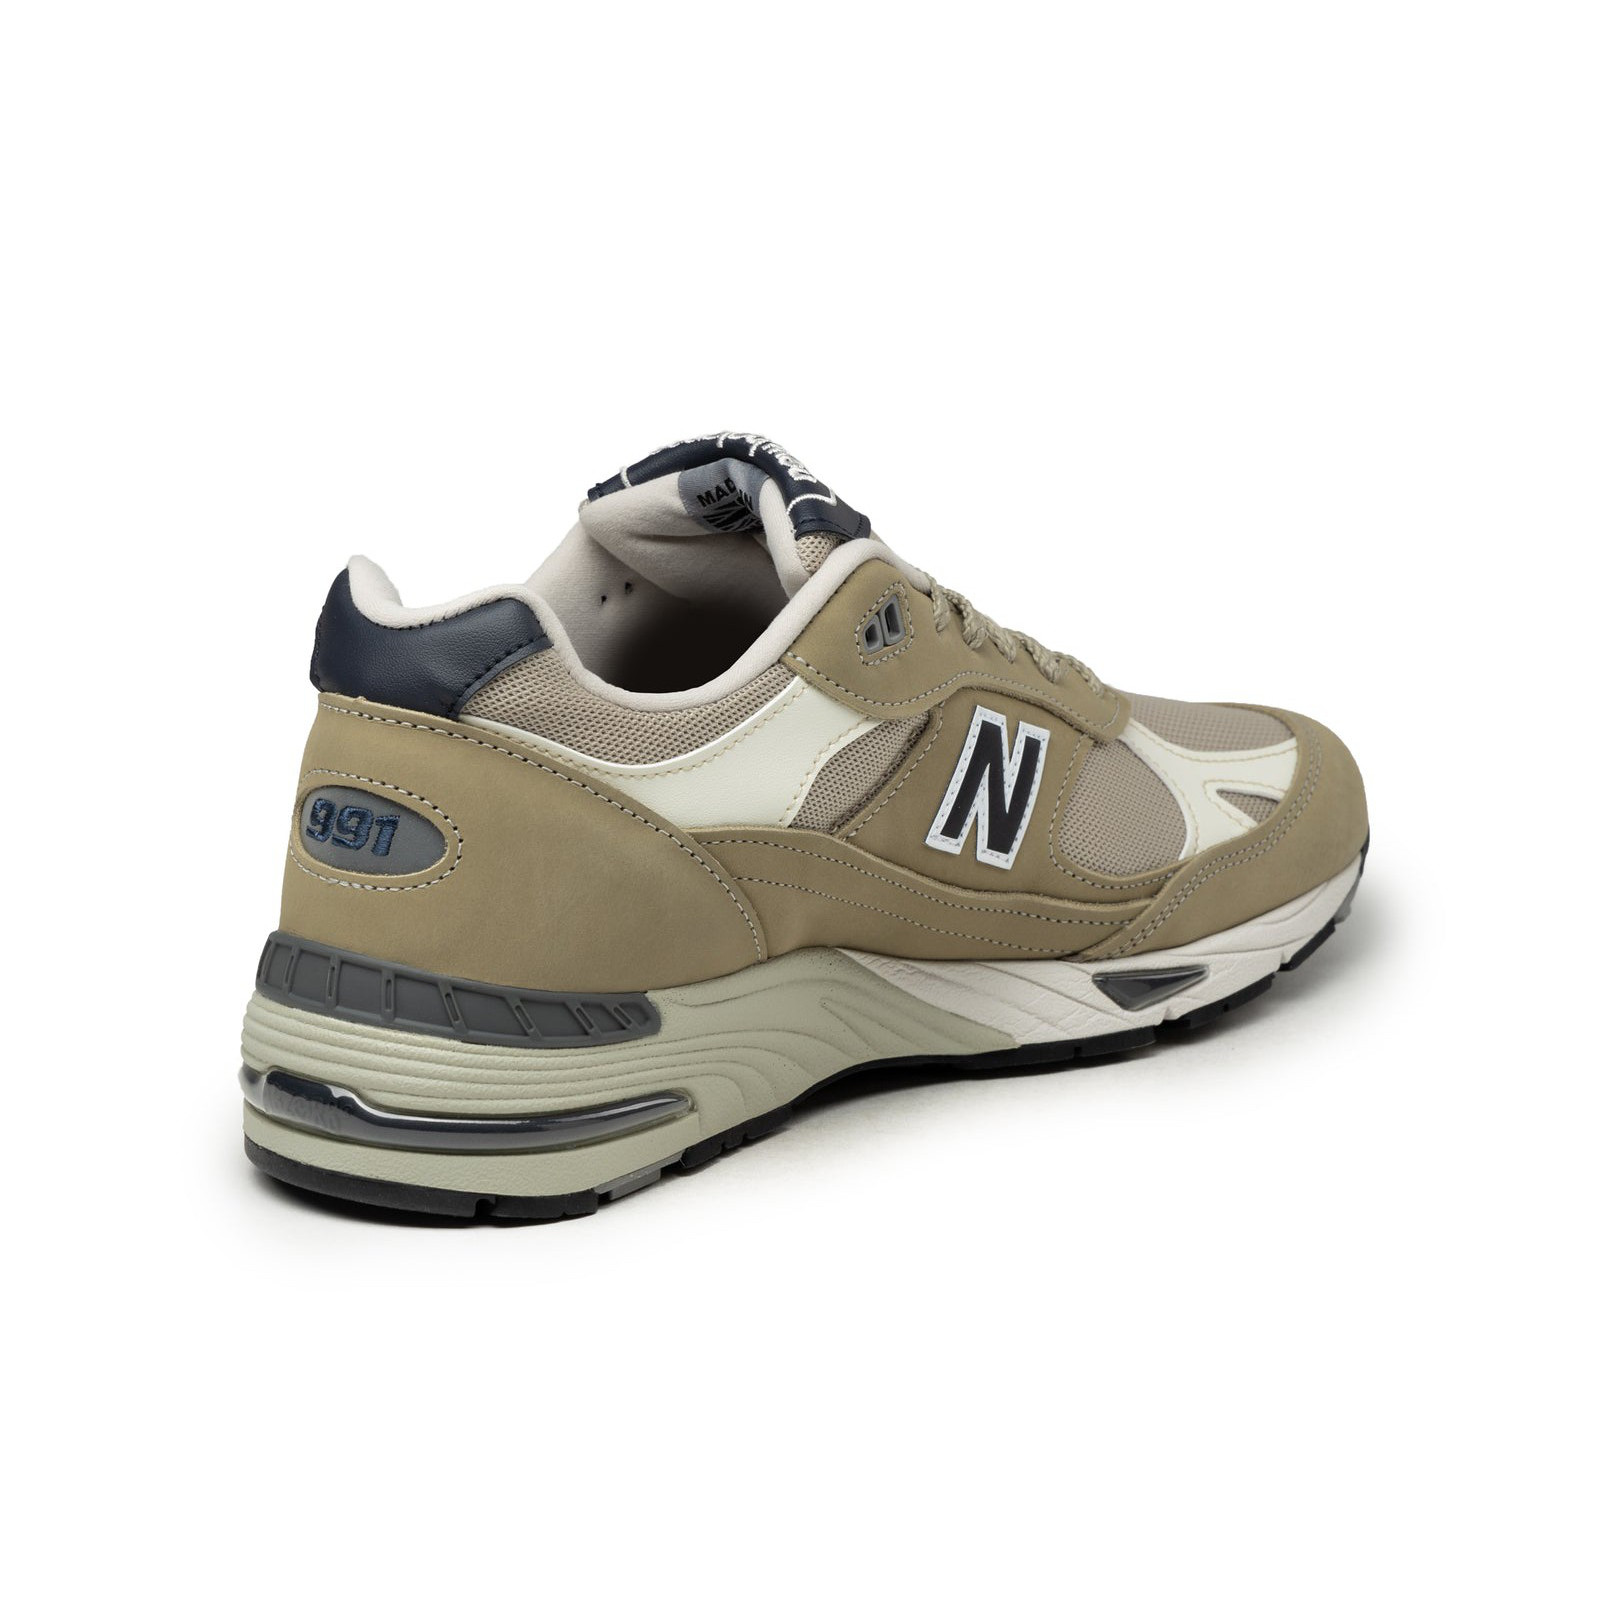 New Balance M991BTN
Made in England
Elm / Brown Rice